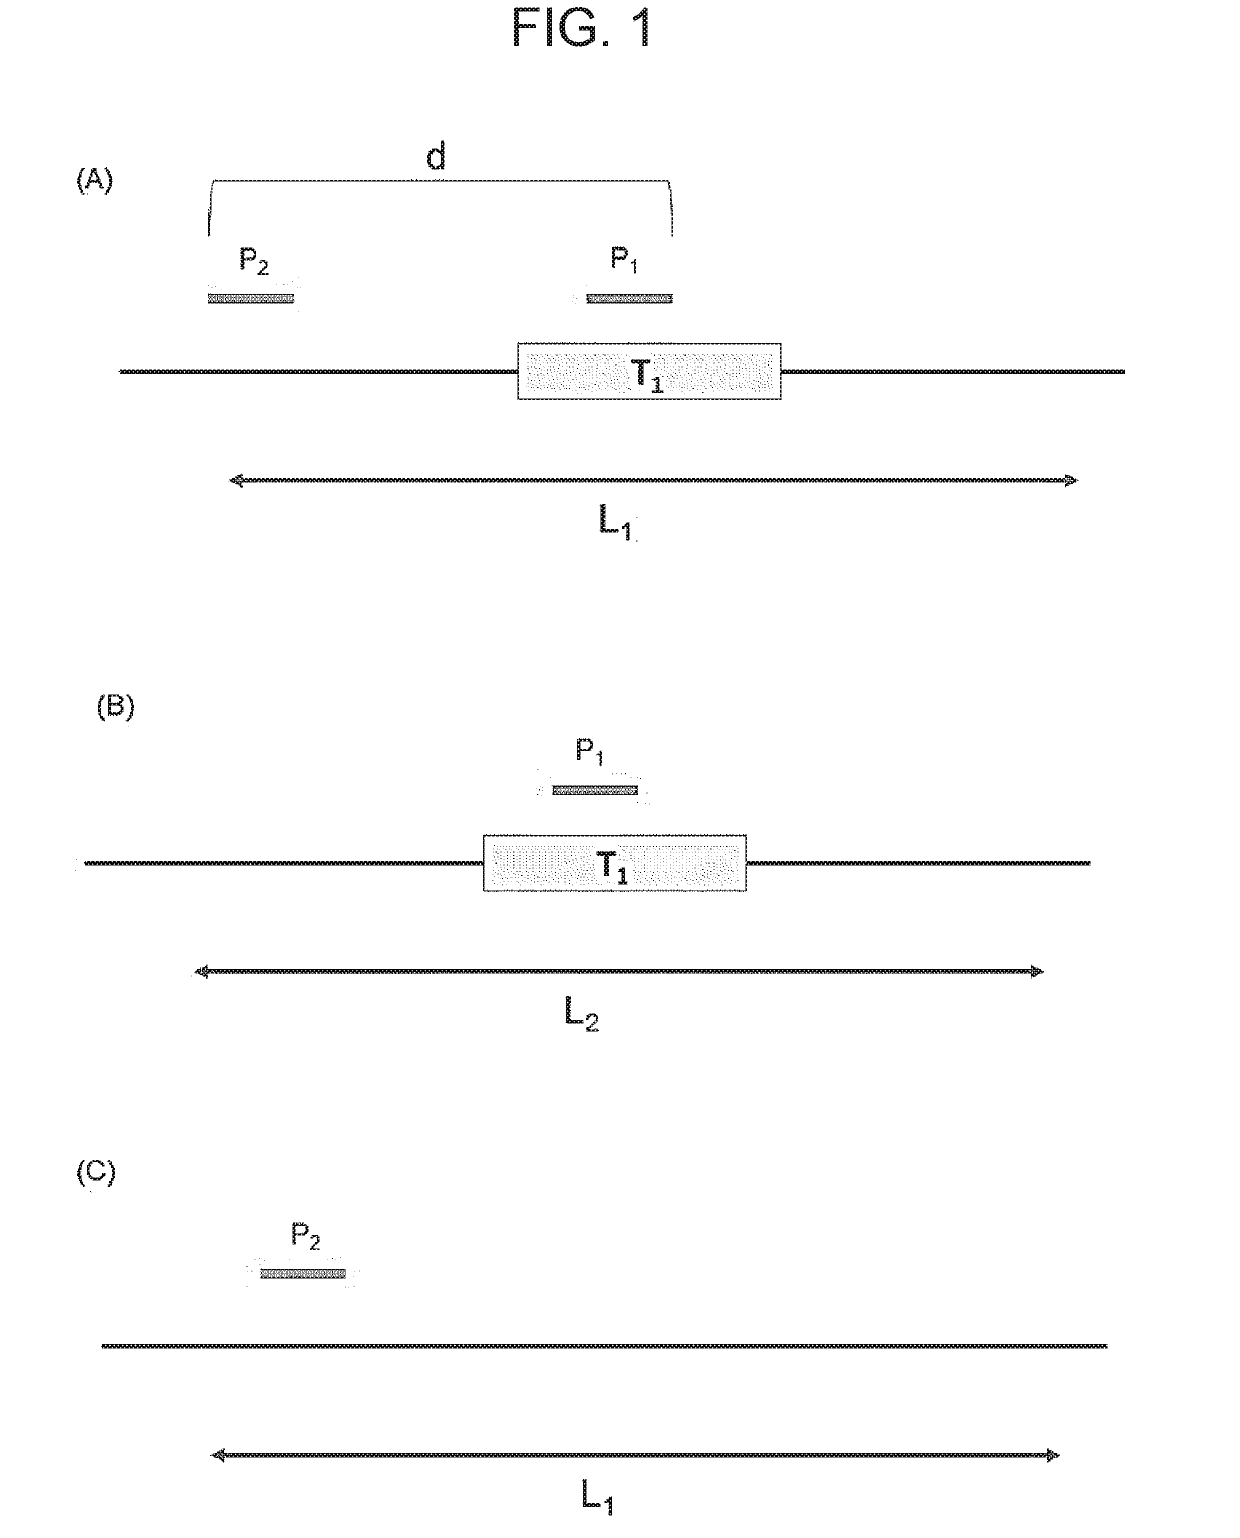 Method for modifying target site in genome of eukaryotic cell, and method for detecting presence or absence of nucleic acid sequence to be detected at target site